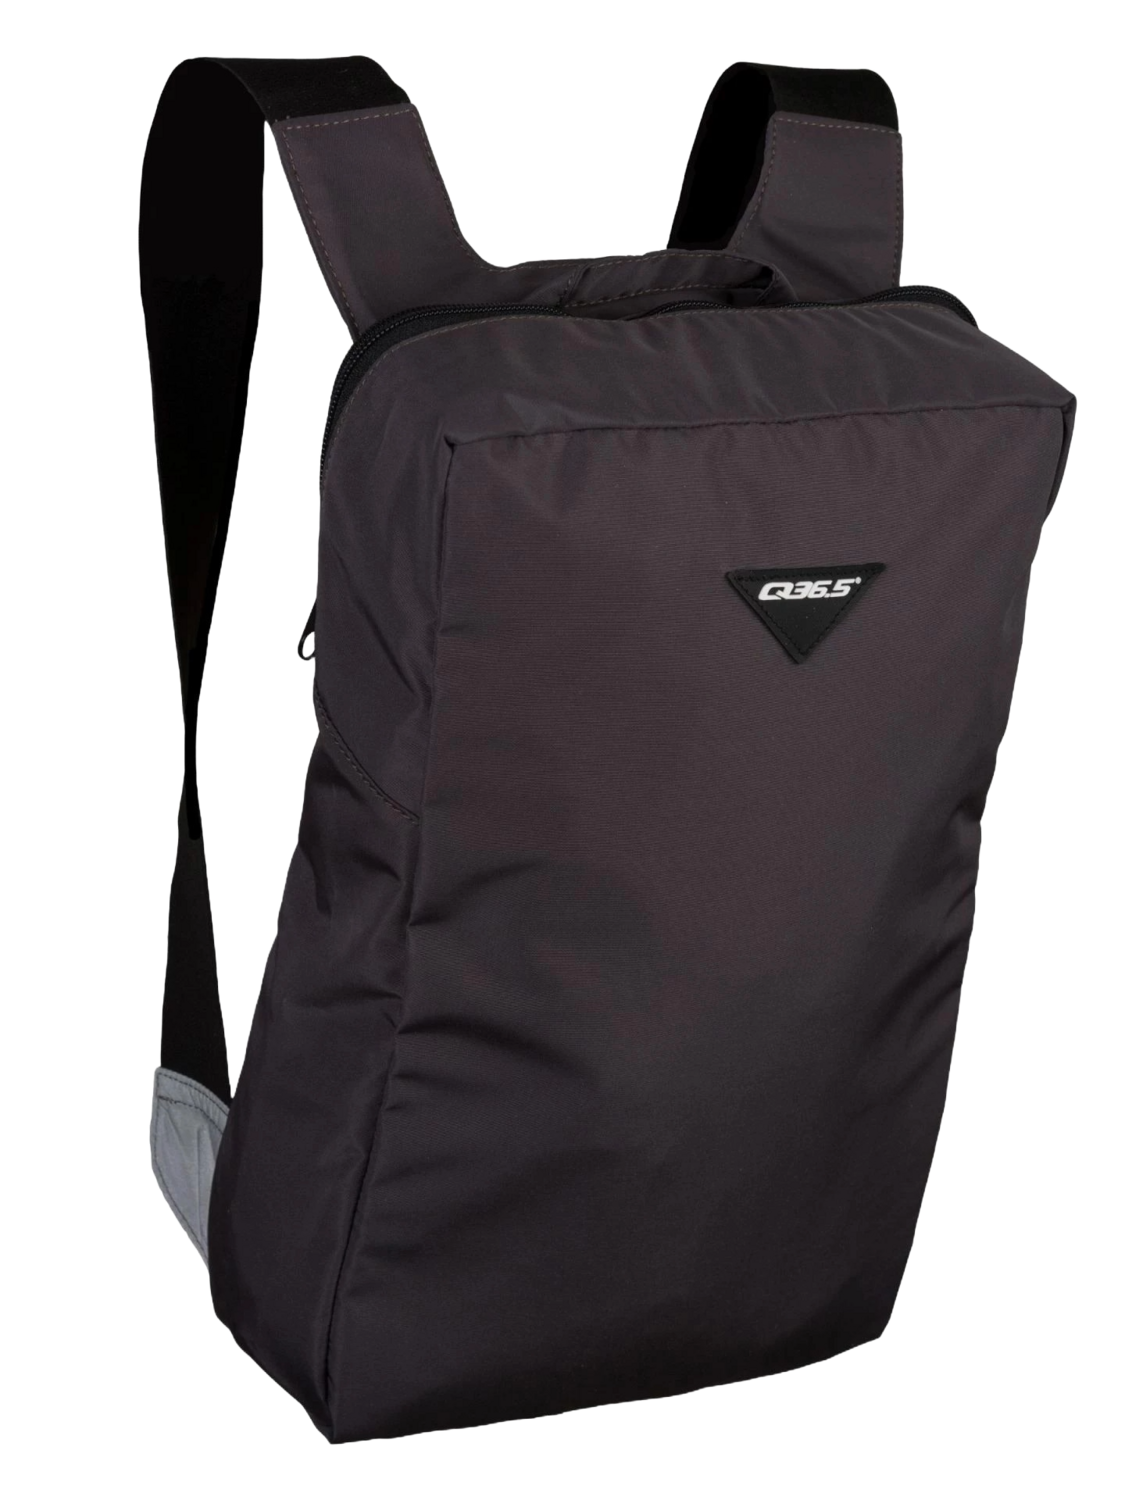 Q36.5 Adventure Riding Backpack